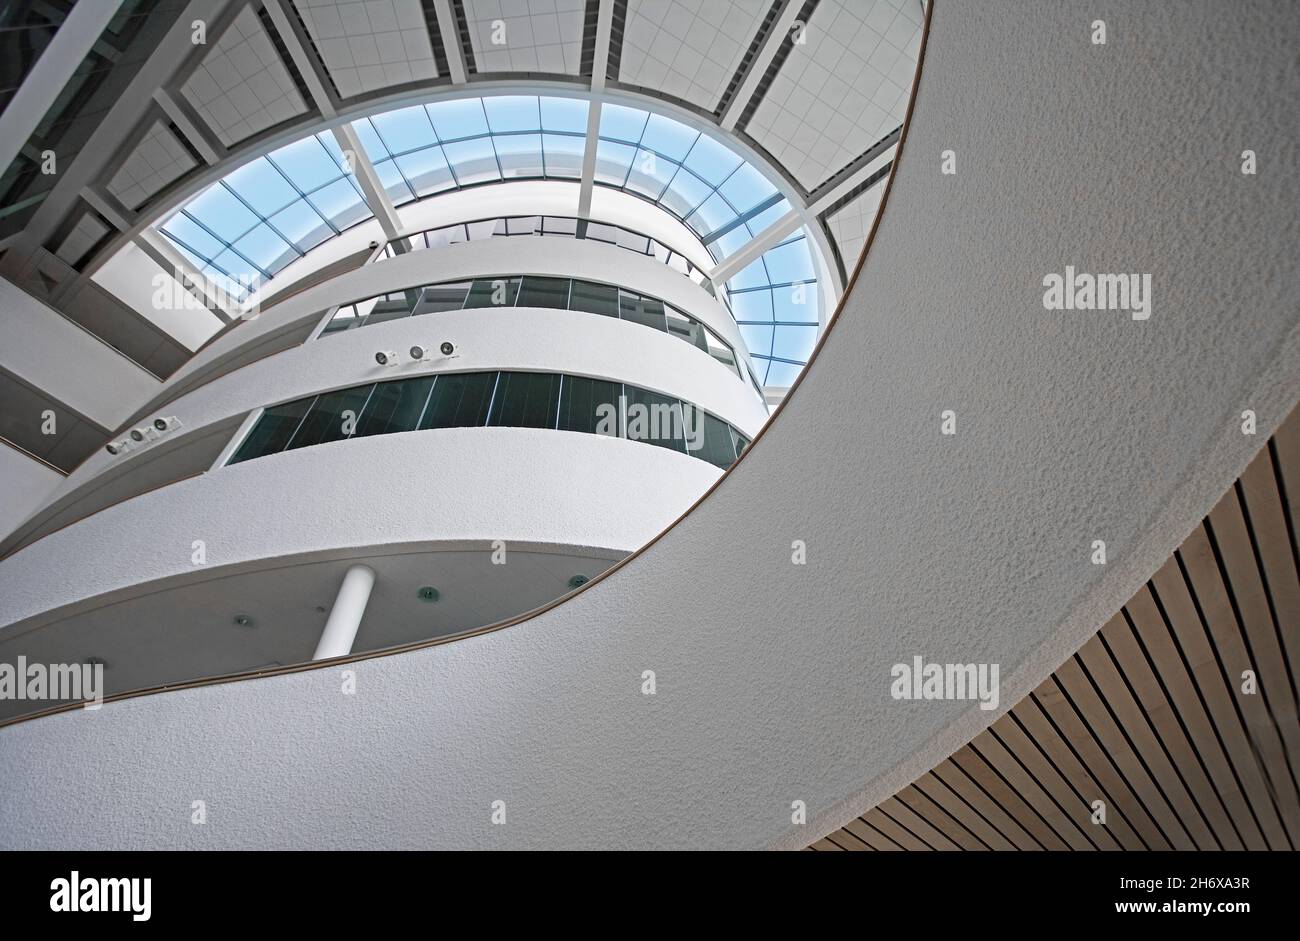 Modern interior atrium architecture with vertical viewpoint Stock Photo